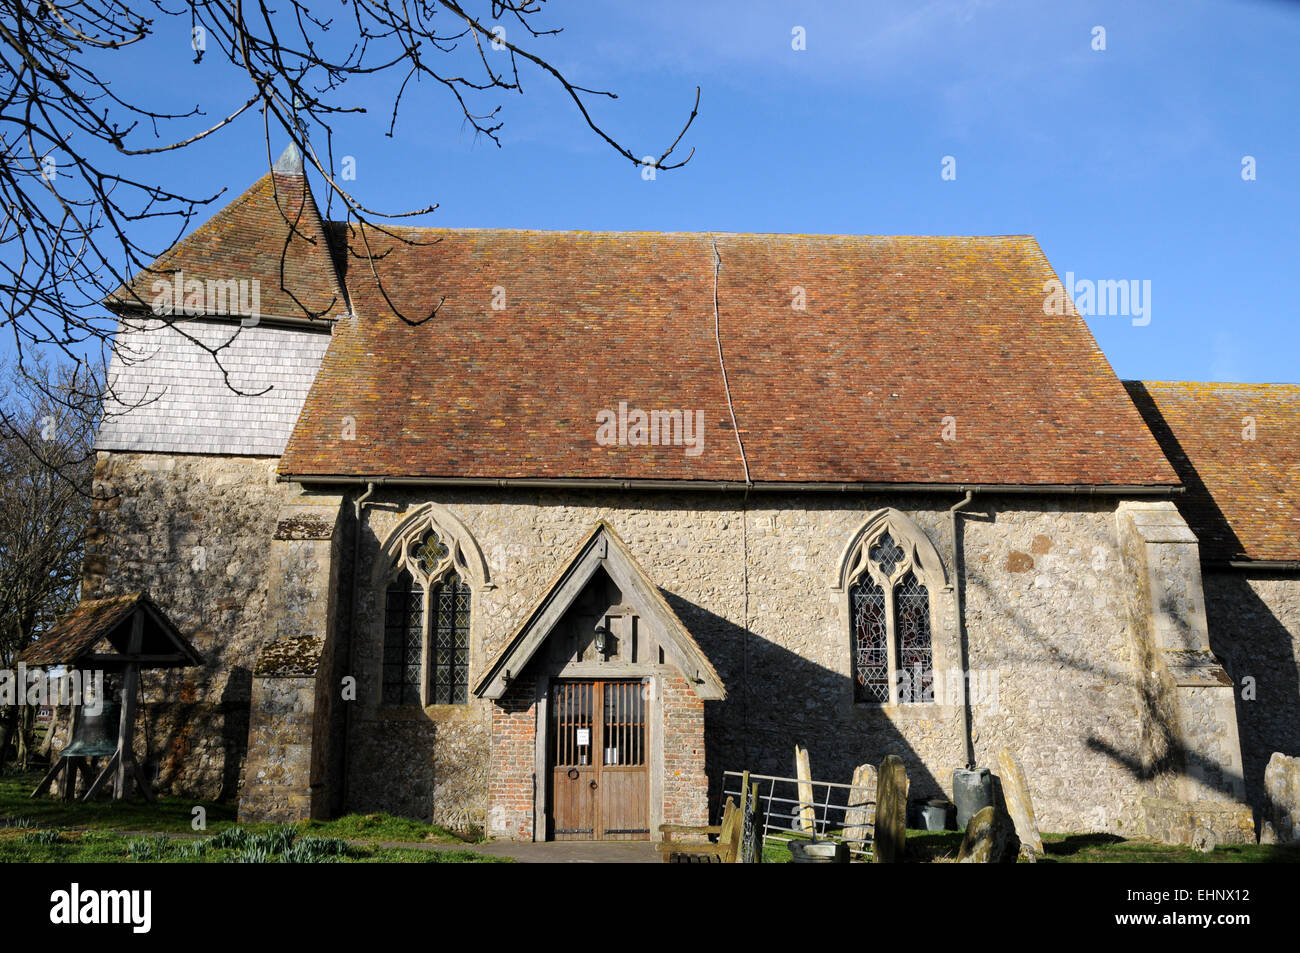 The church of St Peter and St Paul, Bilsington, Kent. It is located on raised ground, just off of the Romney Marsh. Stock Photo